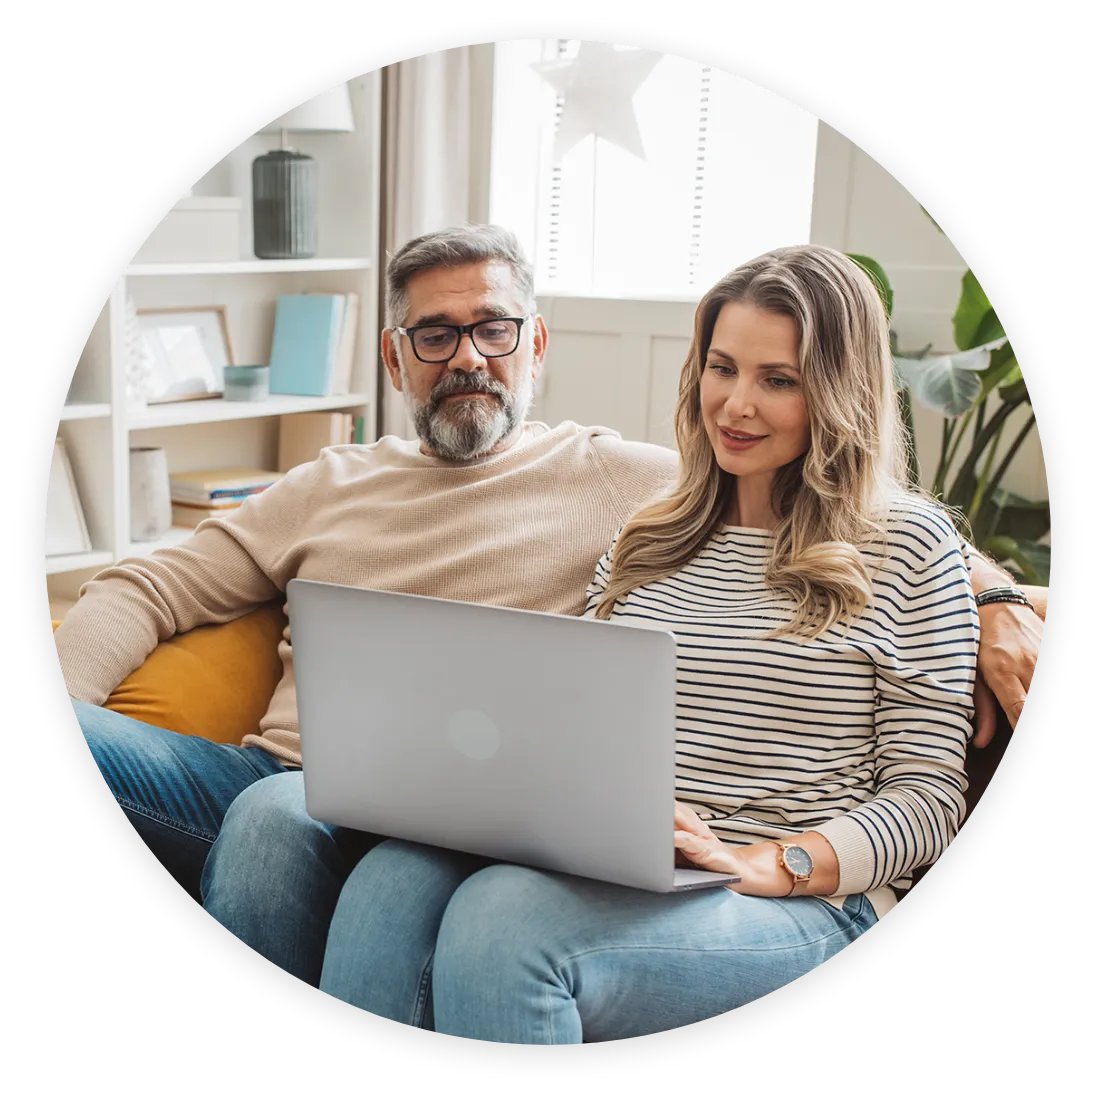 Man and woman smiling on couch looking at laptop